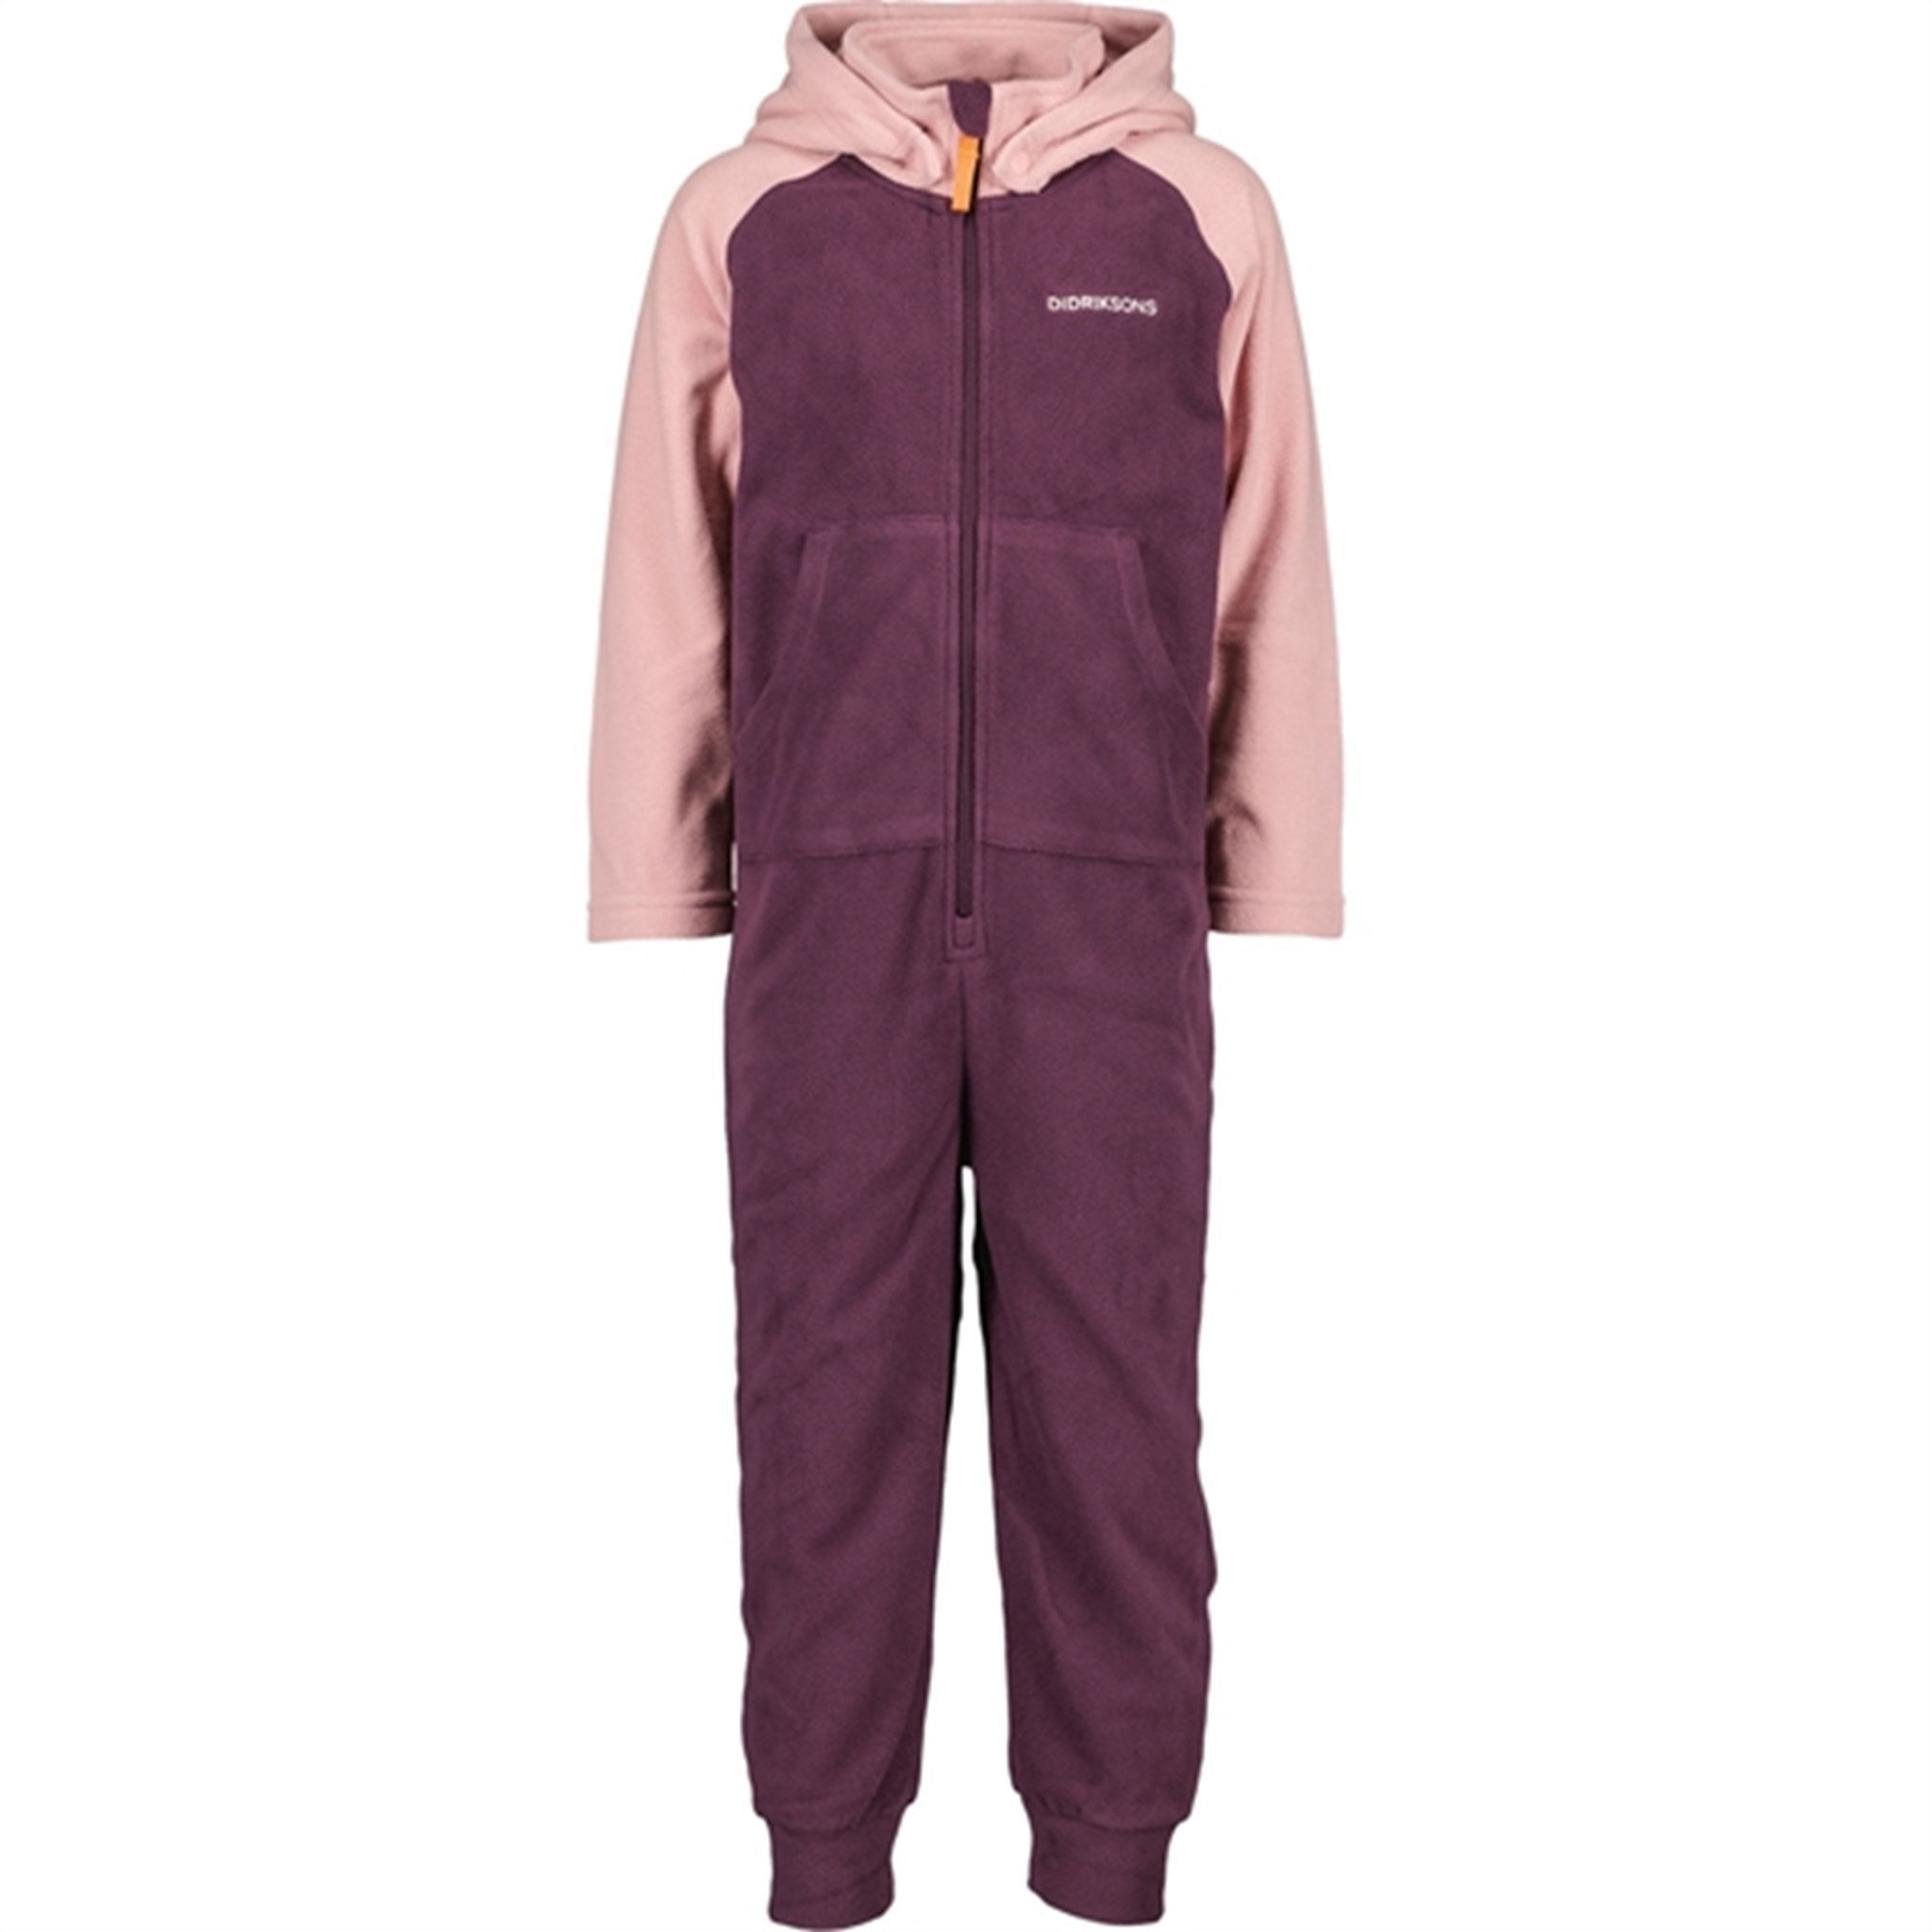 Didriksons Plumb Monte Kids Coverall